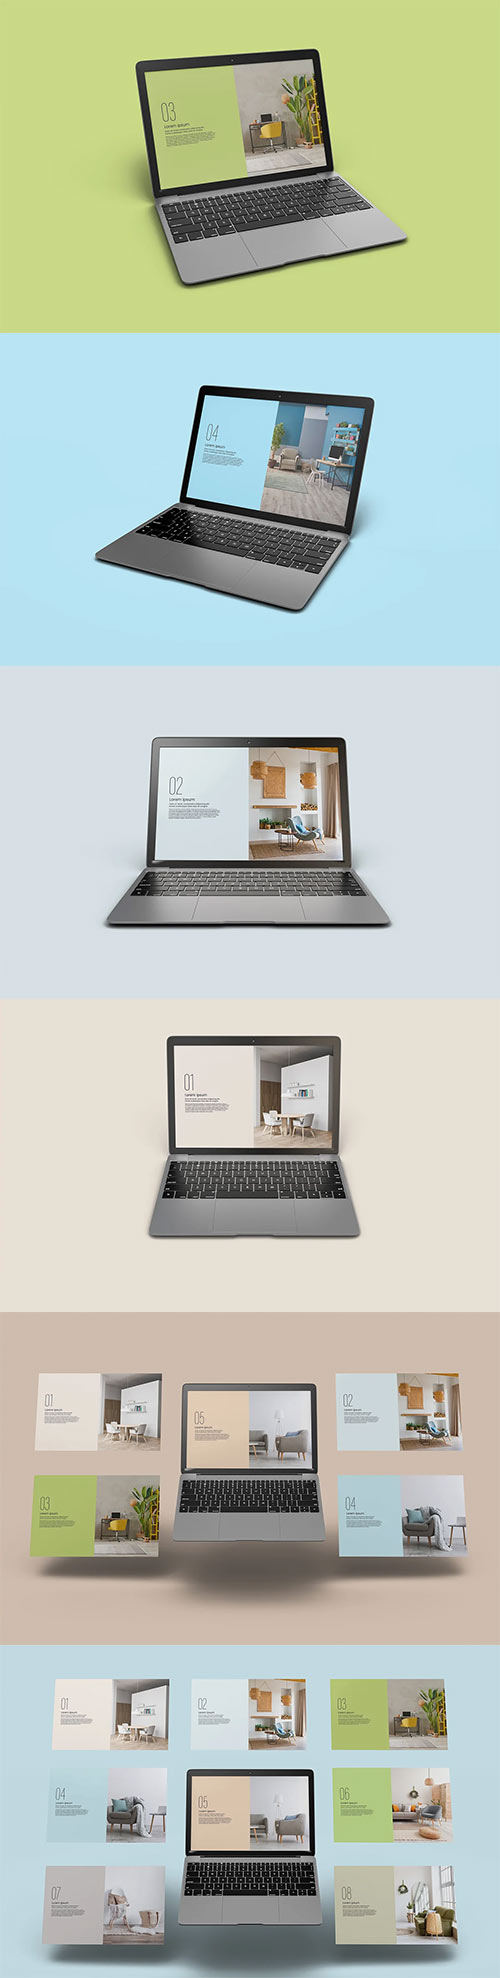 Laptop with Website Mockup 12 views 7536361